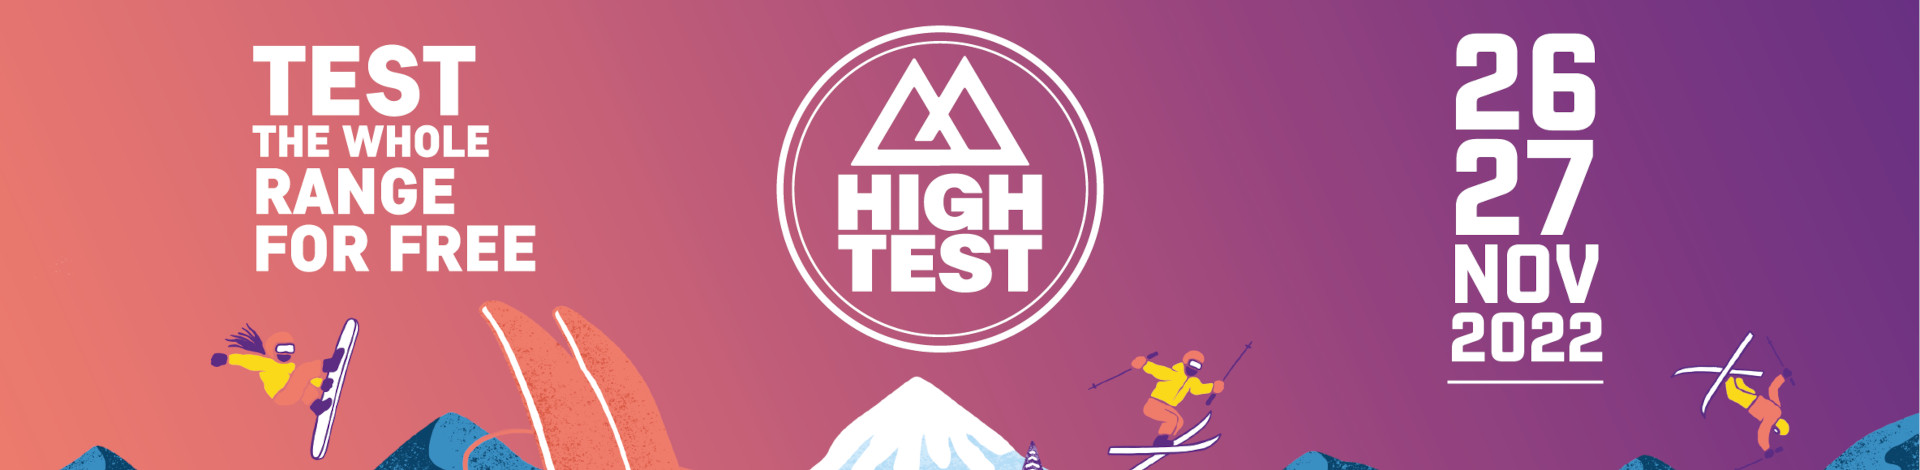 High Test by Decathlon in Val Thorens